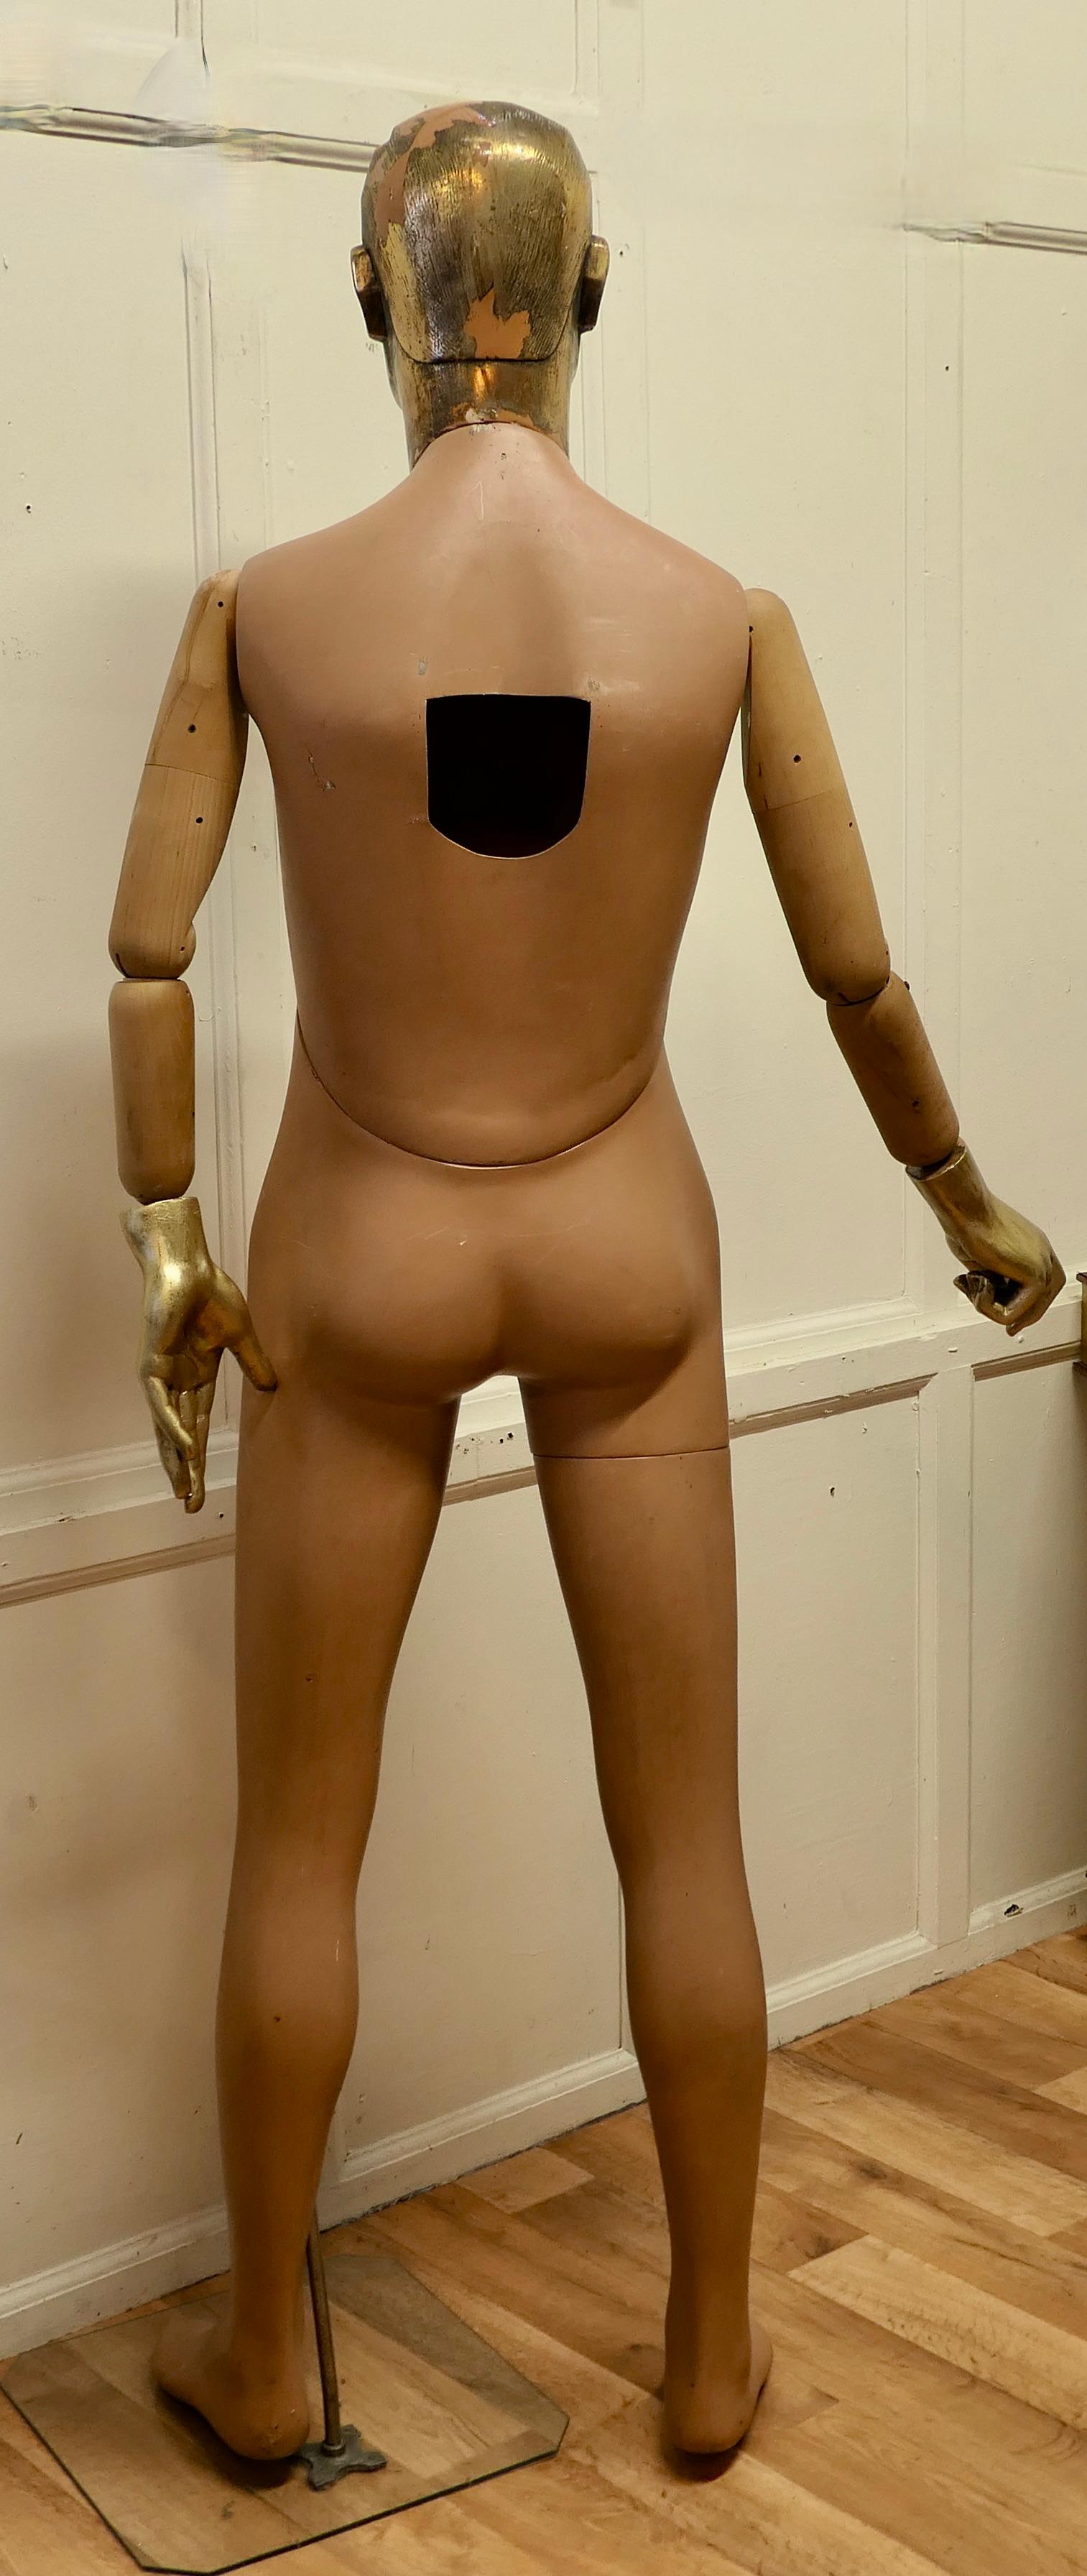 Quirky Offbeat Vintage Male Shop Mannequin For Sale 1